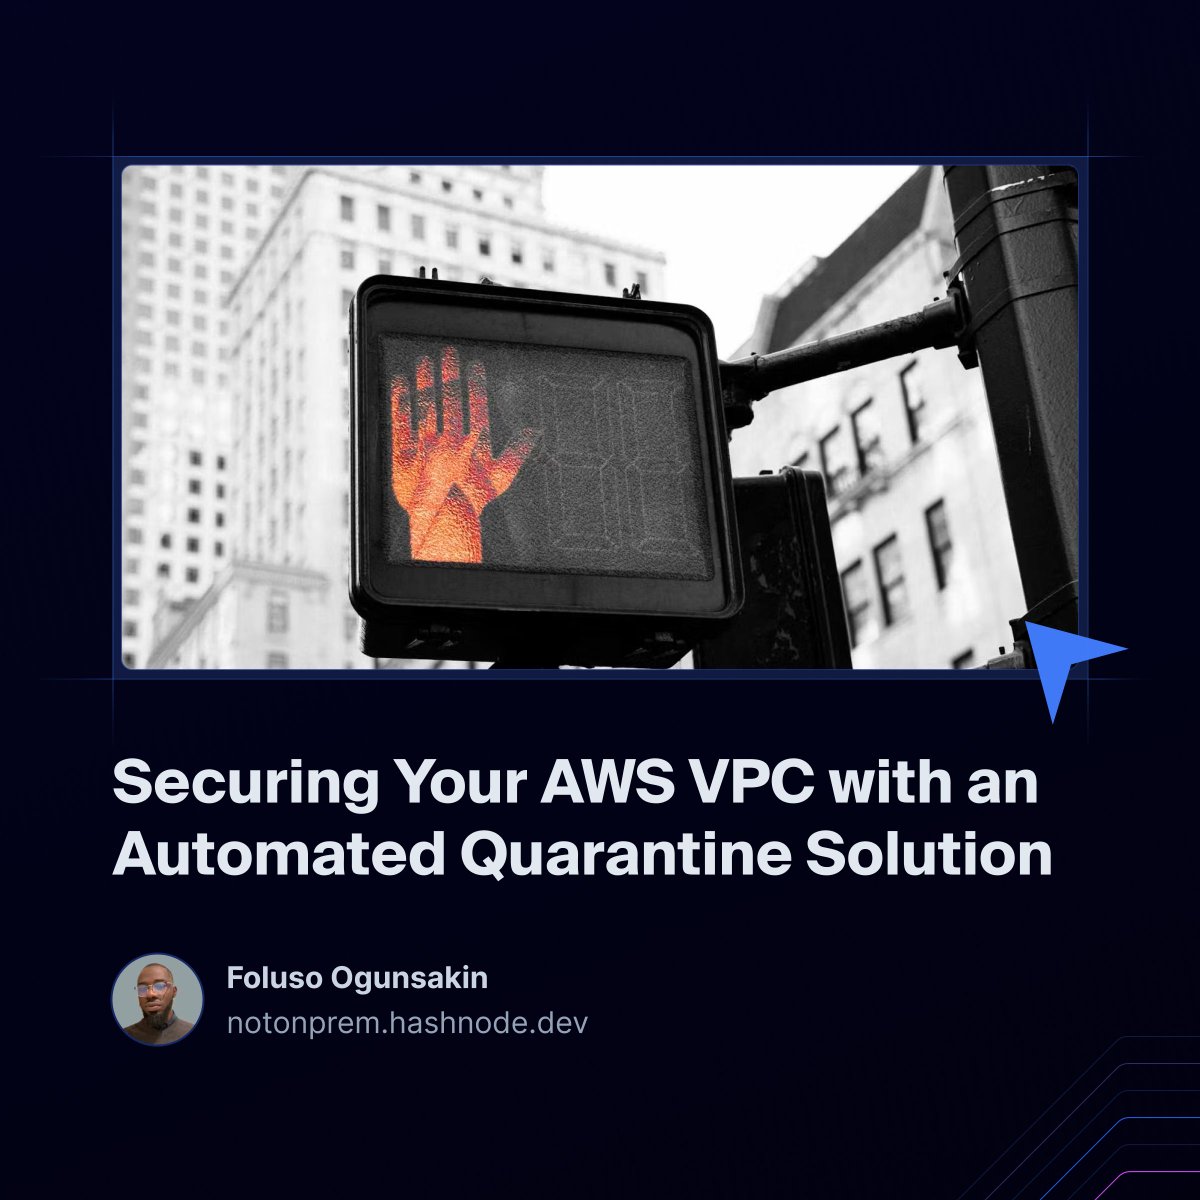 If you want to protect your AWS VPC like a pro then learn to automate threat response with GuardDuty, Lambda, and EventBridge. 

🔐 This hands-on tutorial by @folusomaine will teach you to secure your infrastructure with an automated quarantine solution.